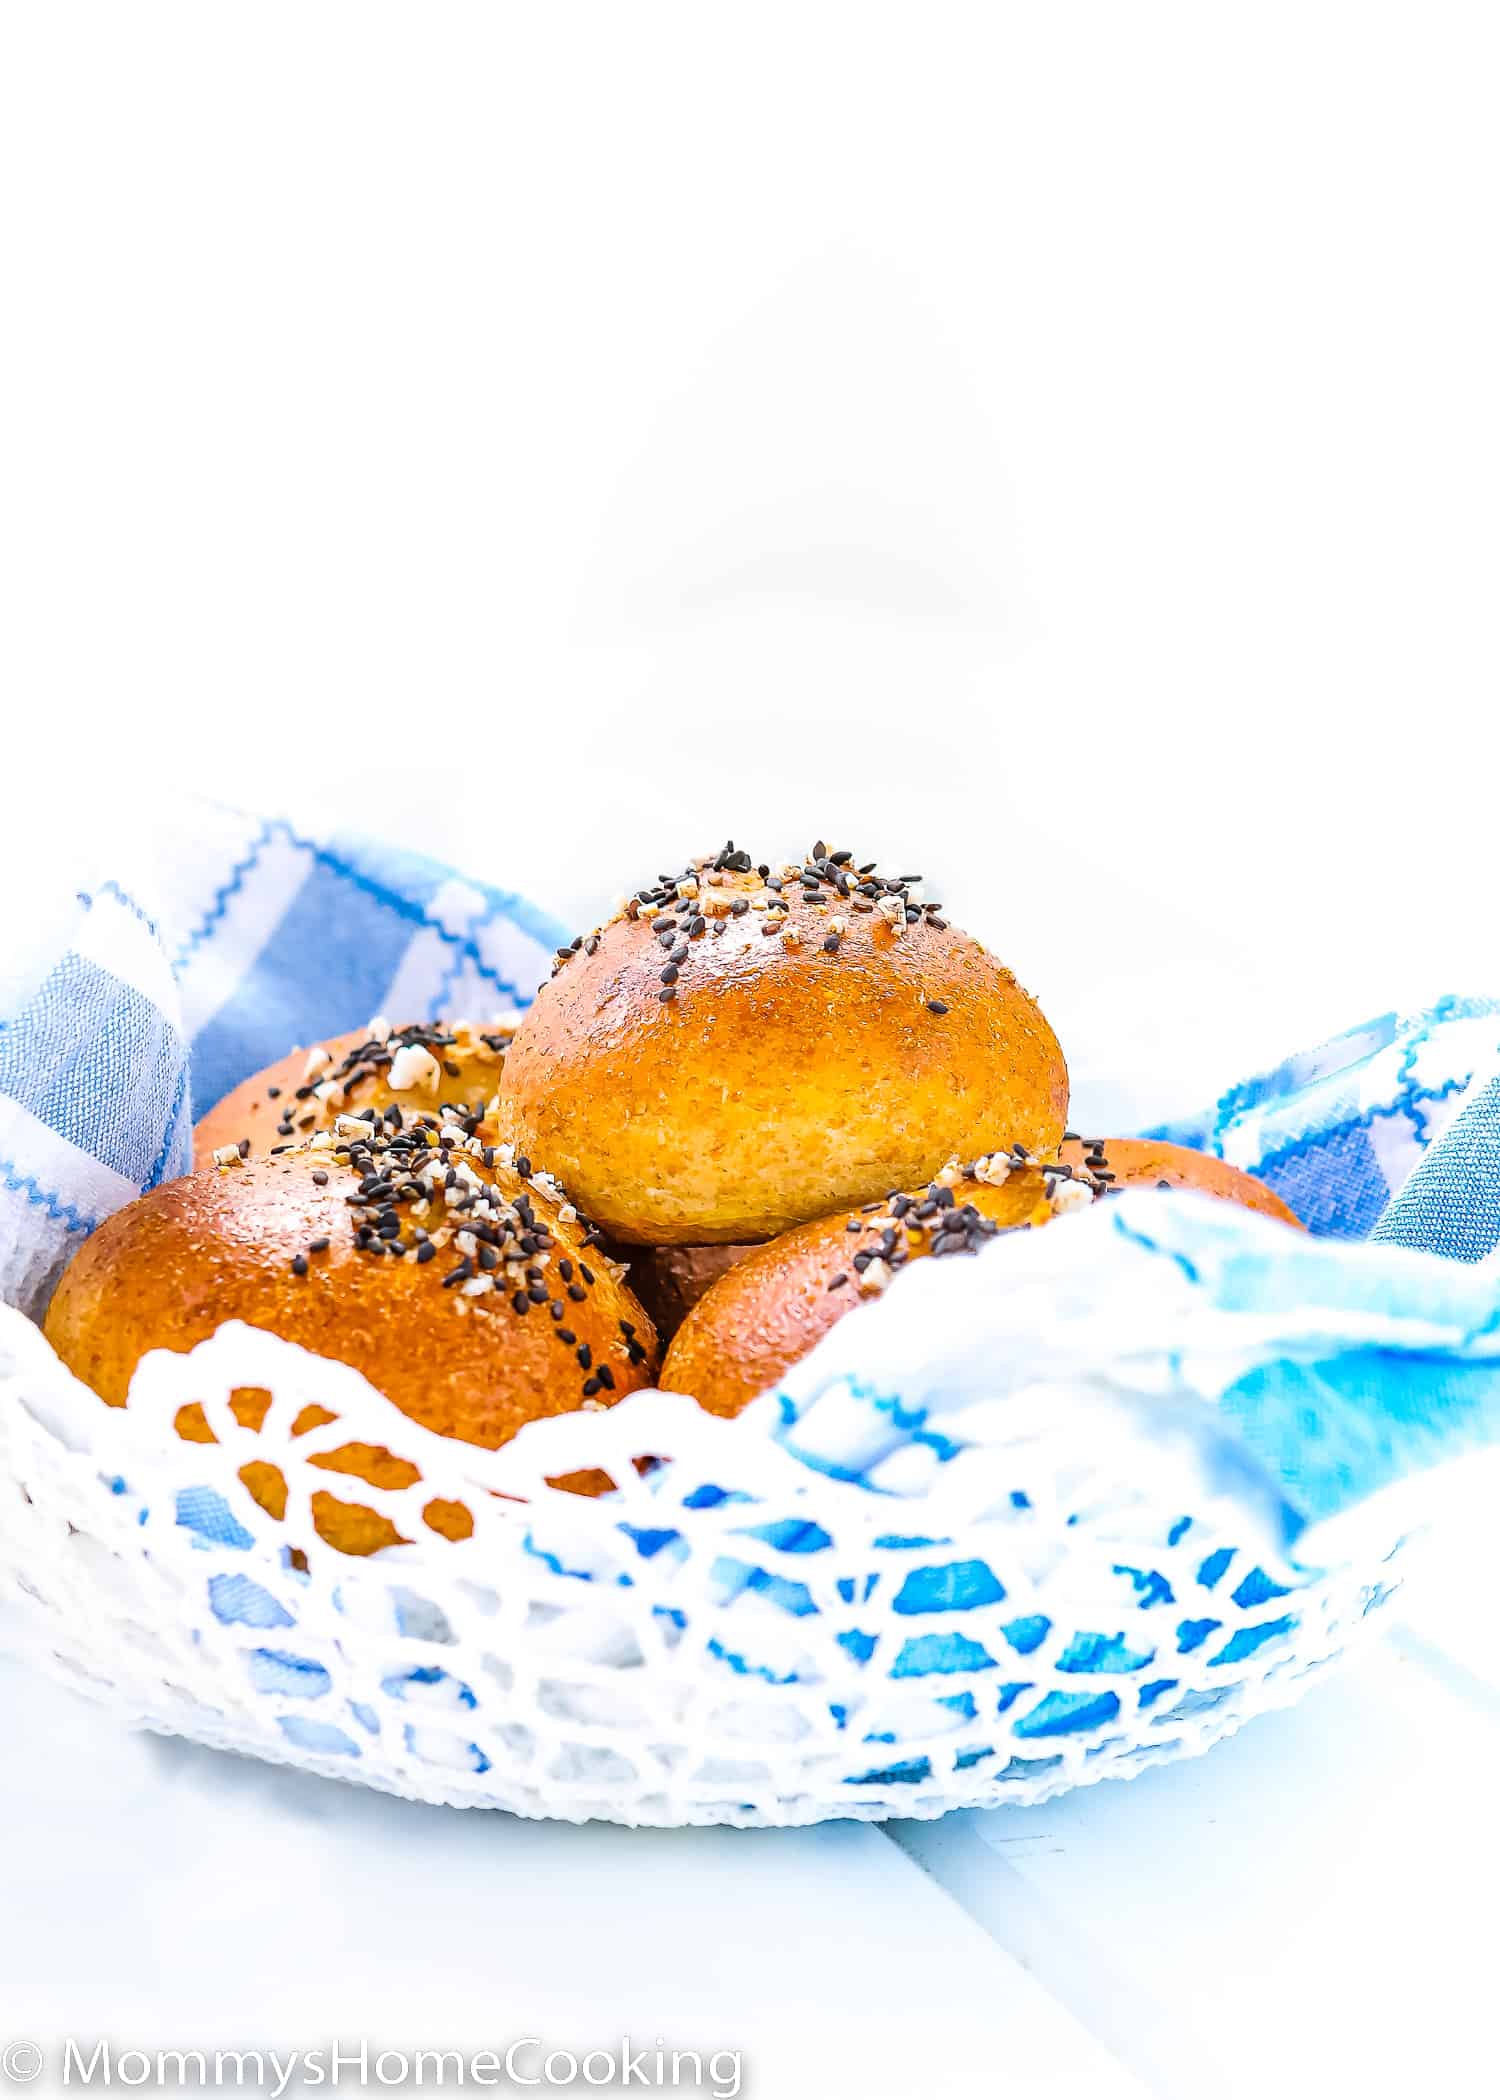 Eggless Honey Whole Wheat Rolls in a bread basket with a blue kitchen towel over a white surface.